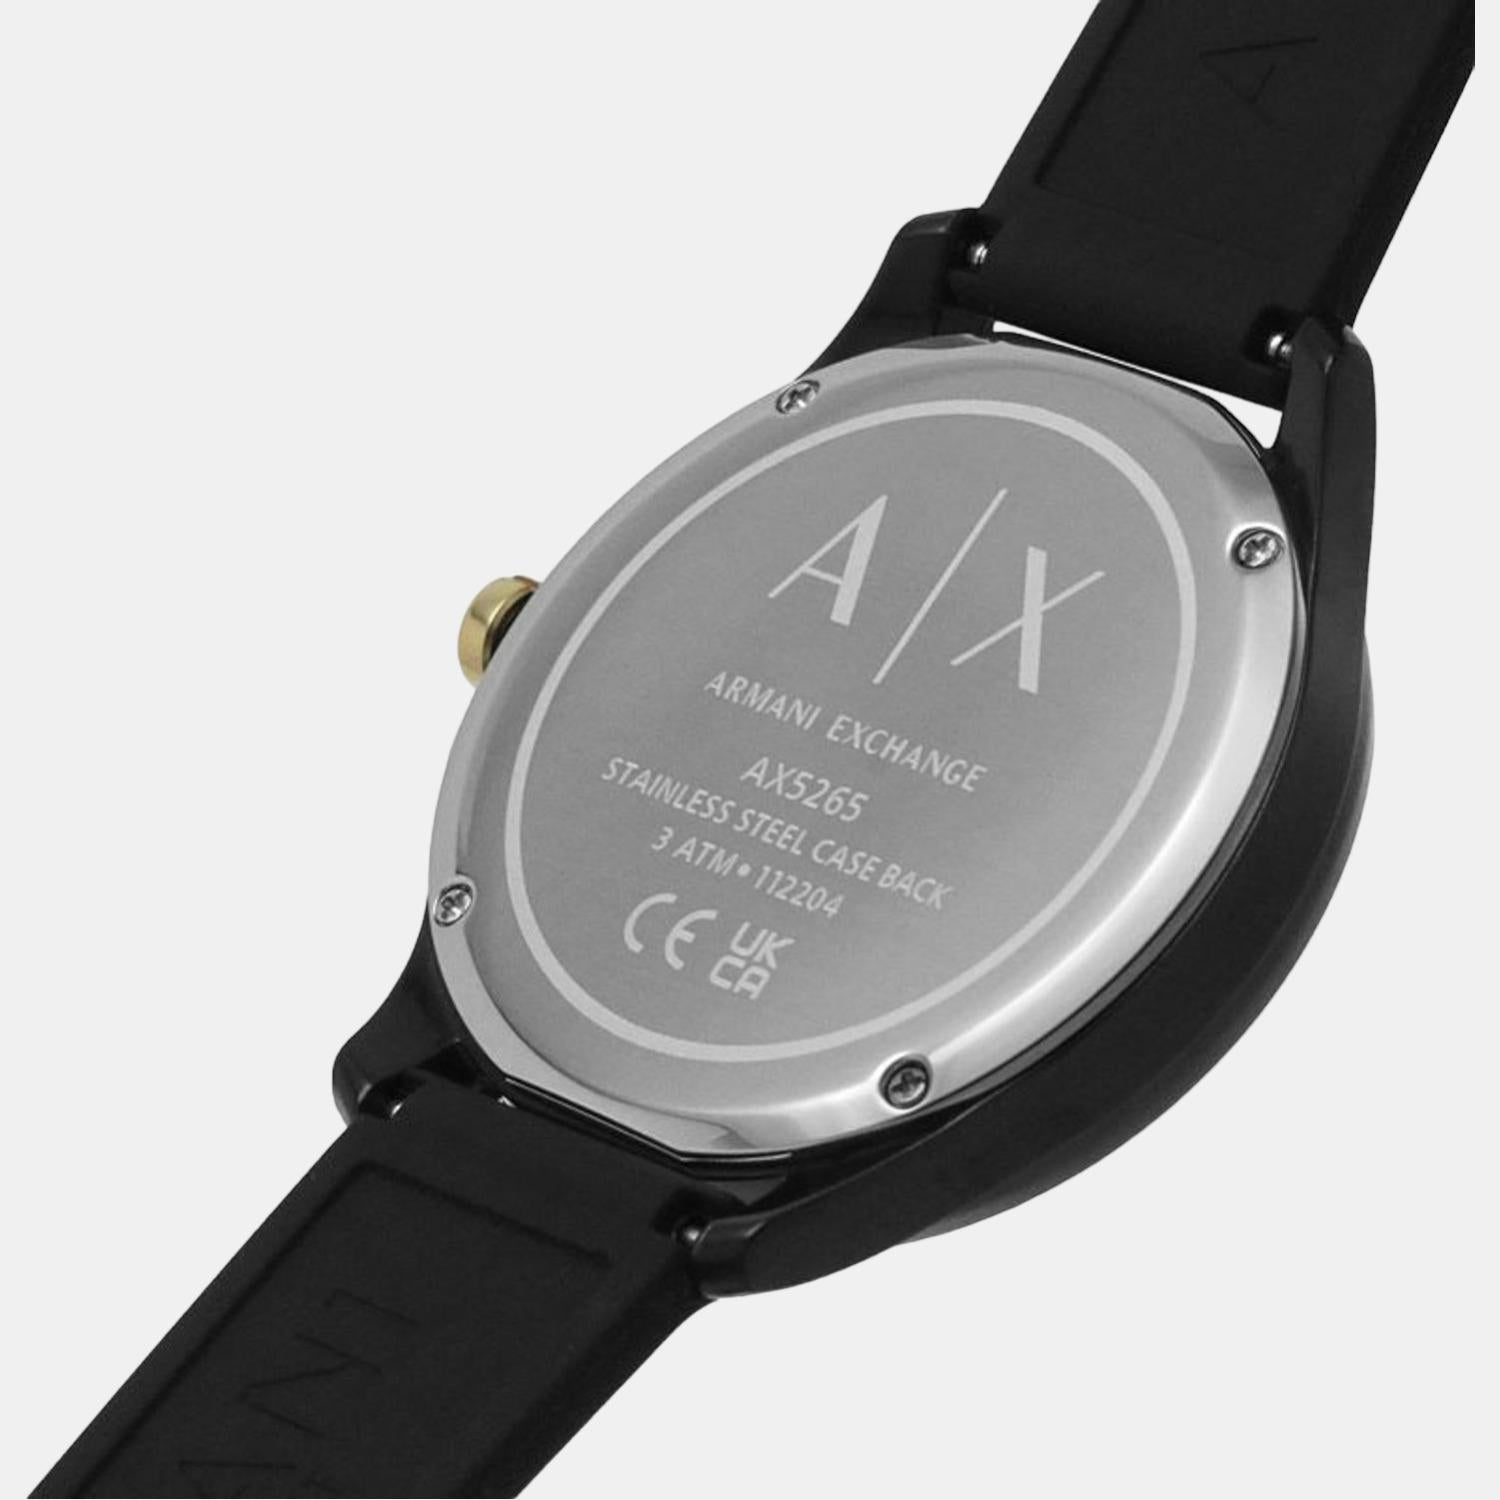 Female Analog Silicon Watch AX5265 – Just In Time